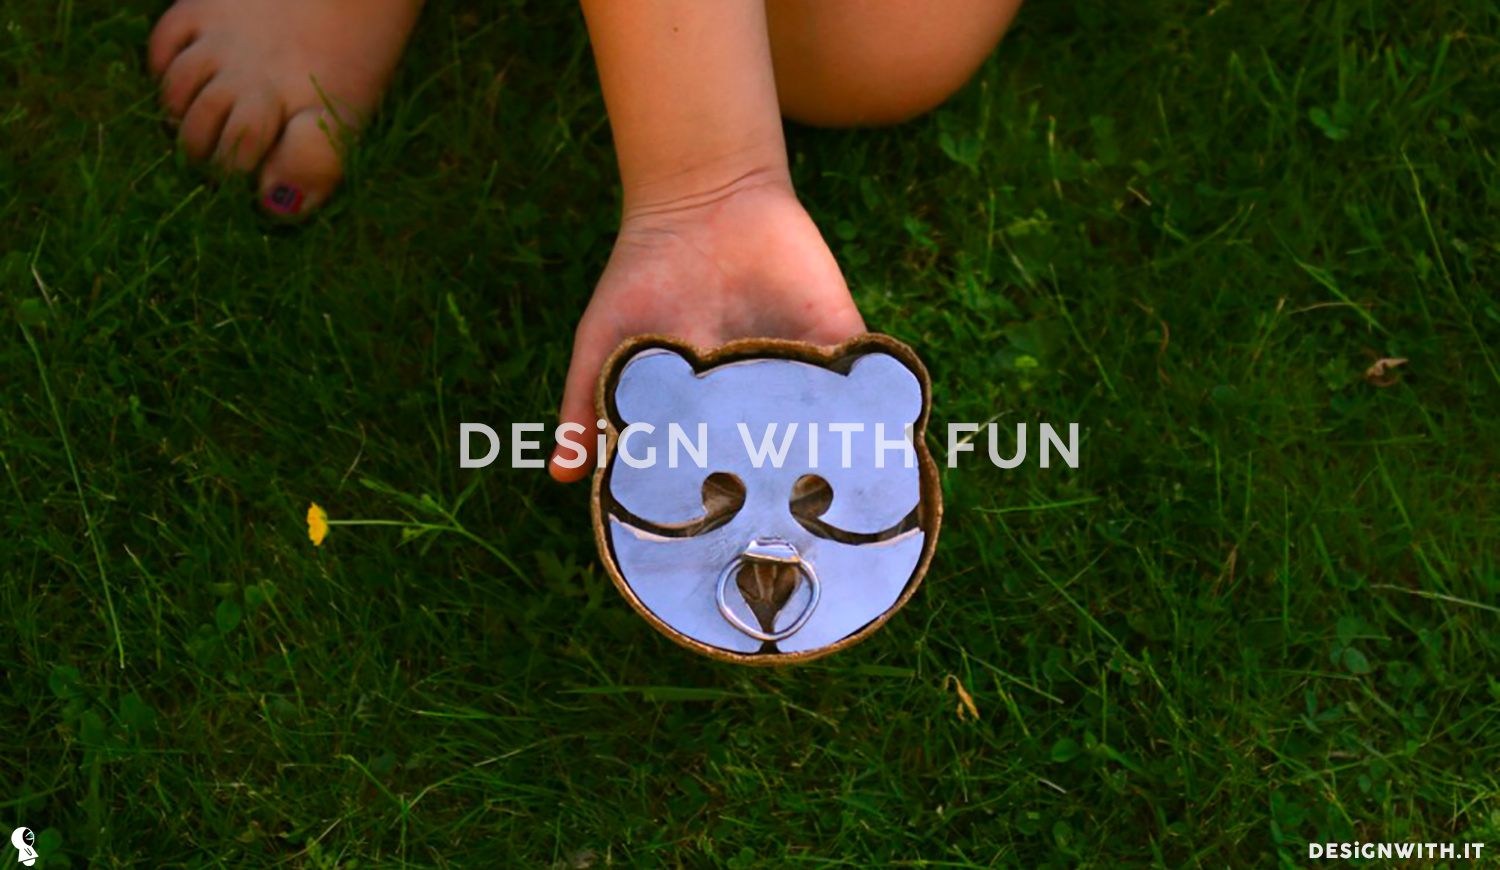 Design with fun. Design with it!